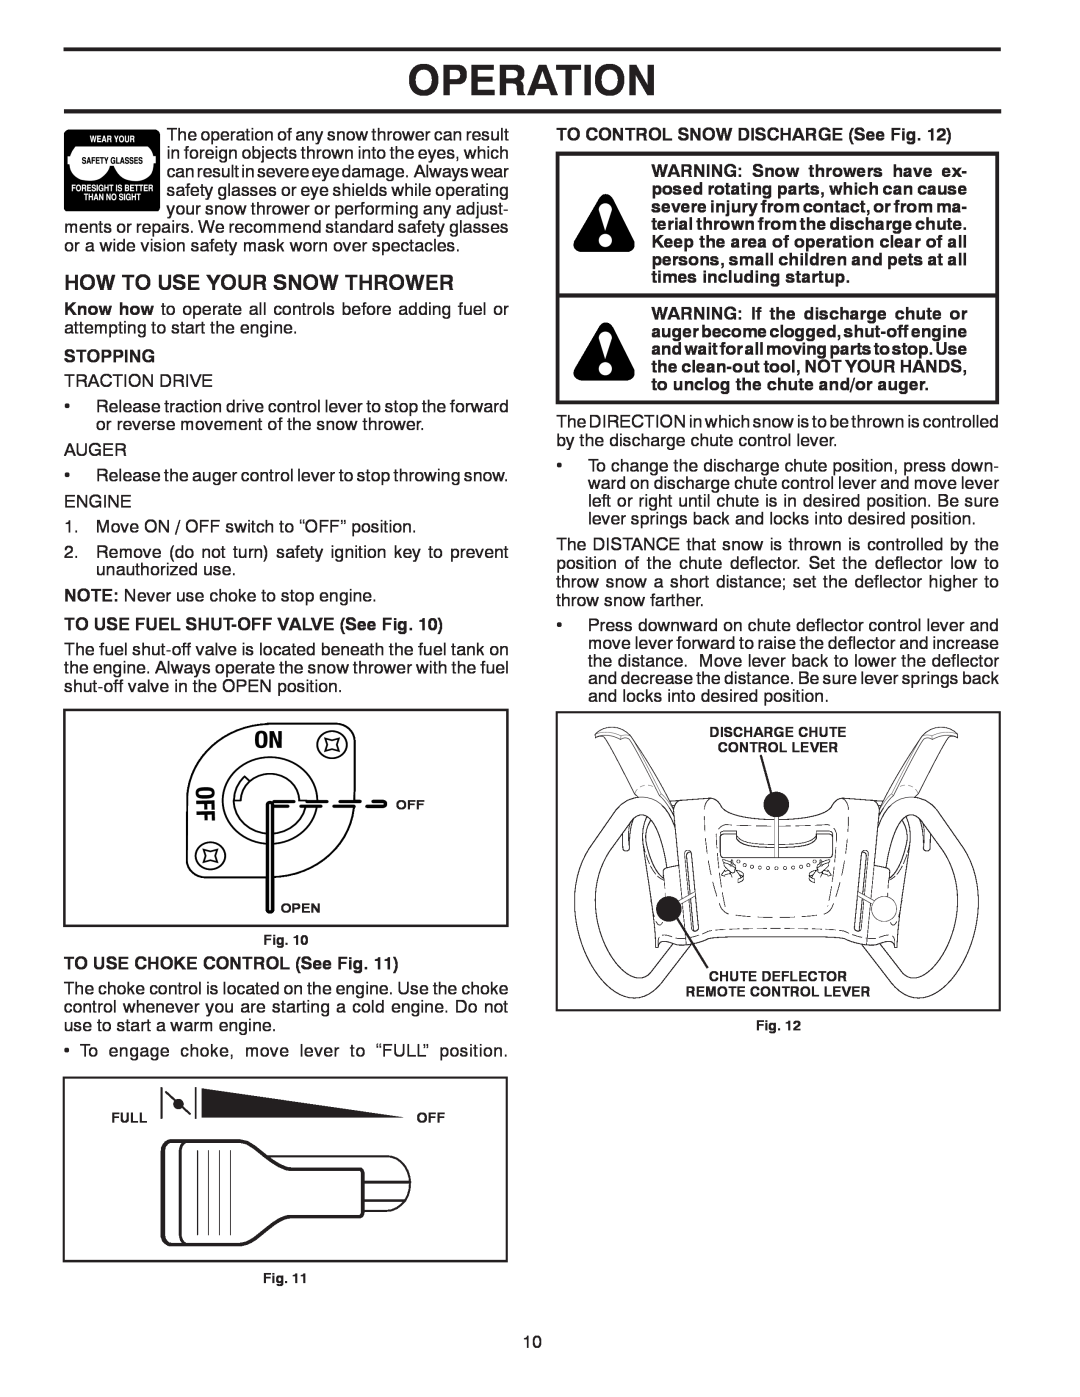 Poulan 96198002701, 429956 How To Use Your Snow Thrower, Operation, Stopping, TO USE FUEL SHUT-OFF VALVE See Fig 